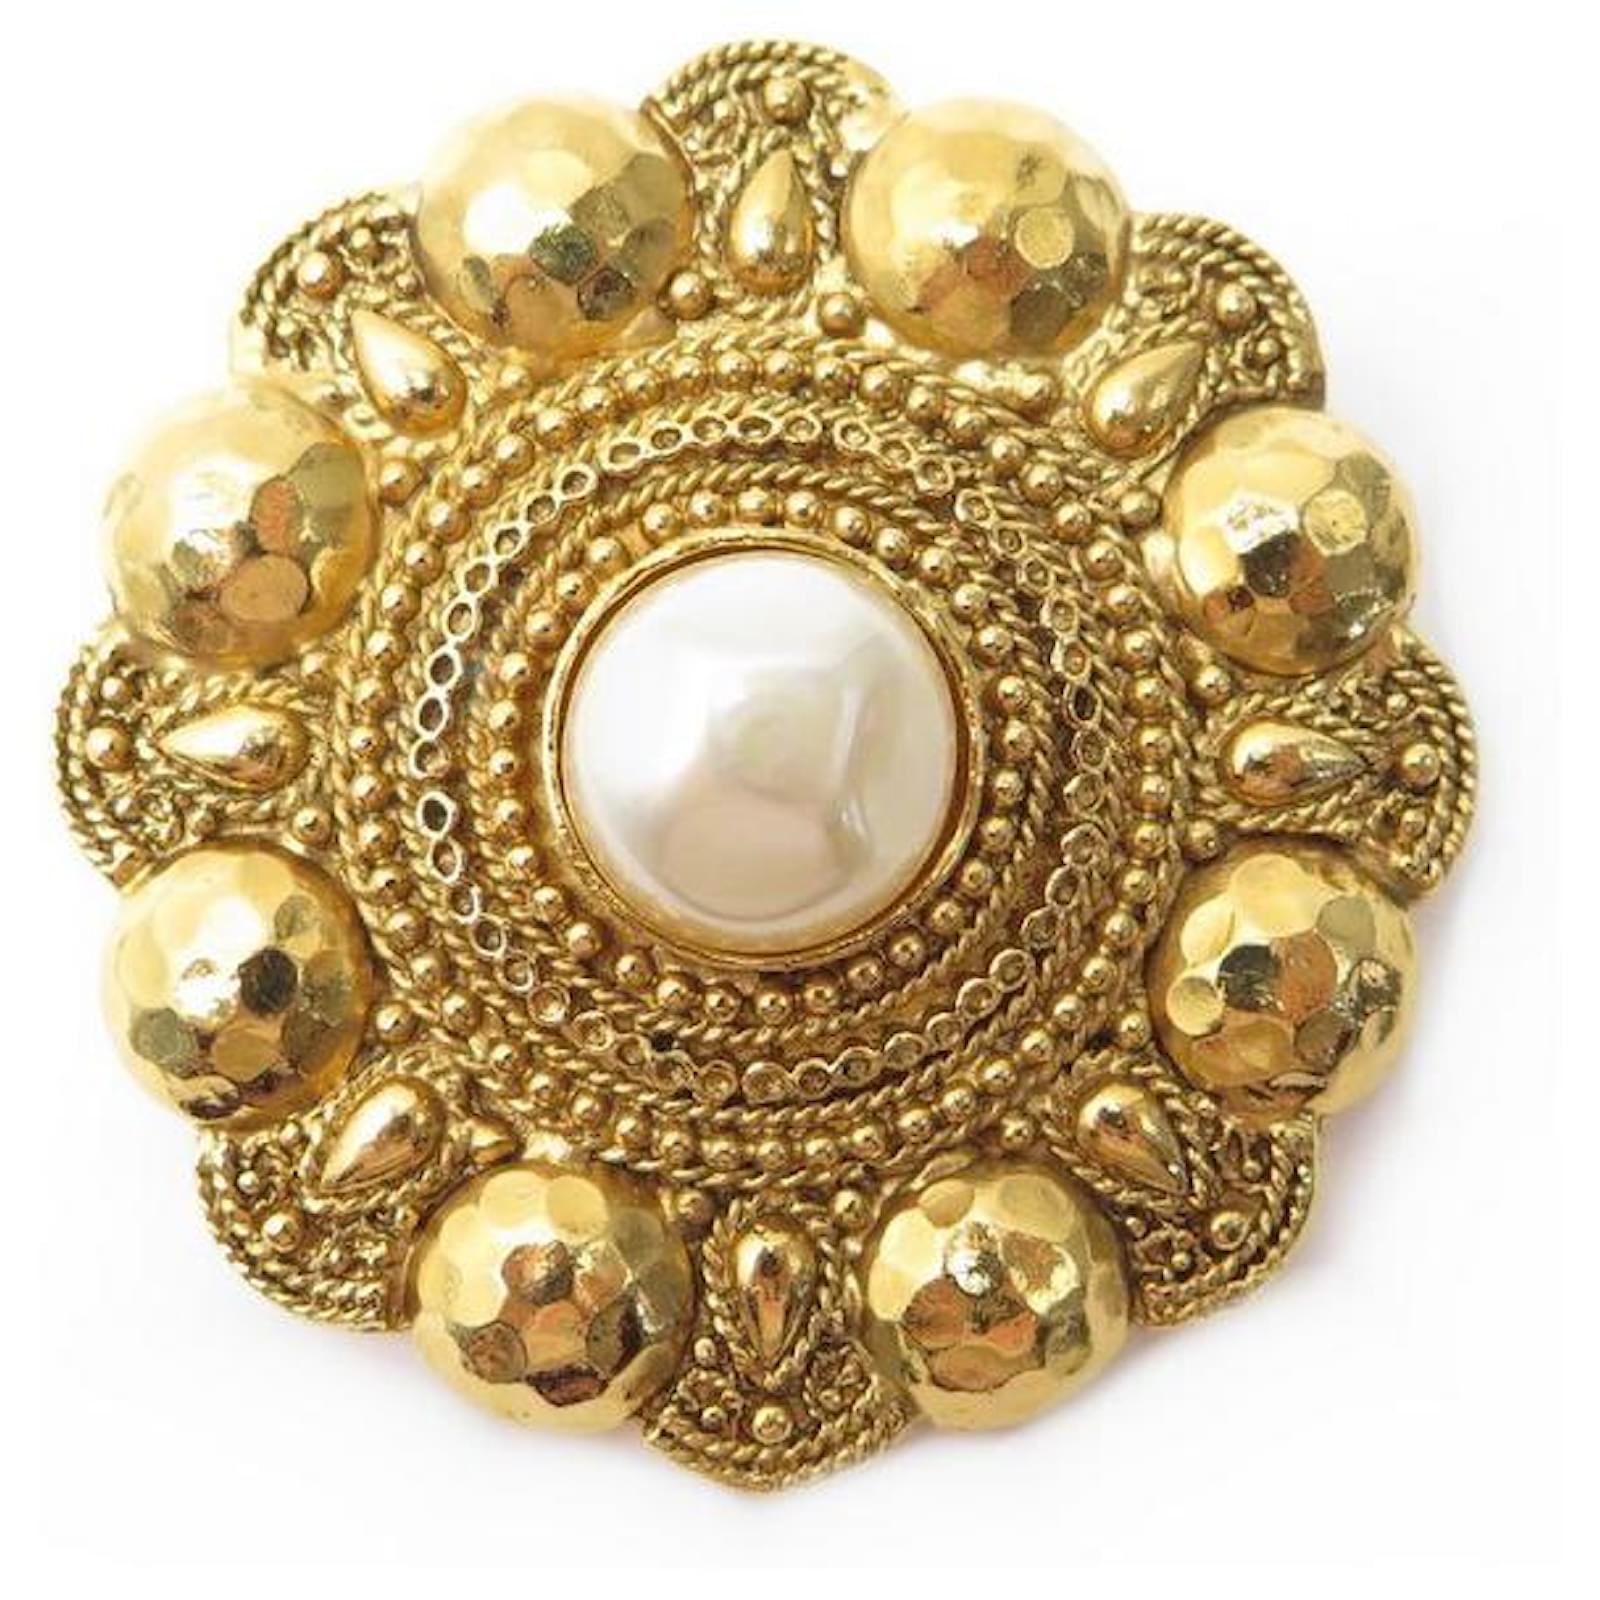 Other jewelry NEW VINTAGE CHANEL BROOCH IN GOLD METAL & CENTRAL PEARL  GOLDEN NEW BROOCH ref.411245 - Joli Closet